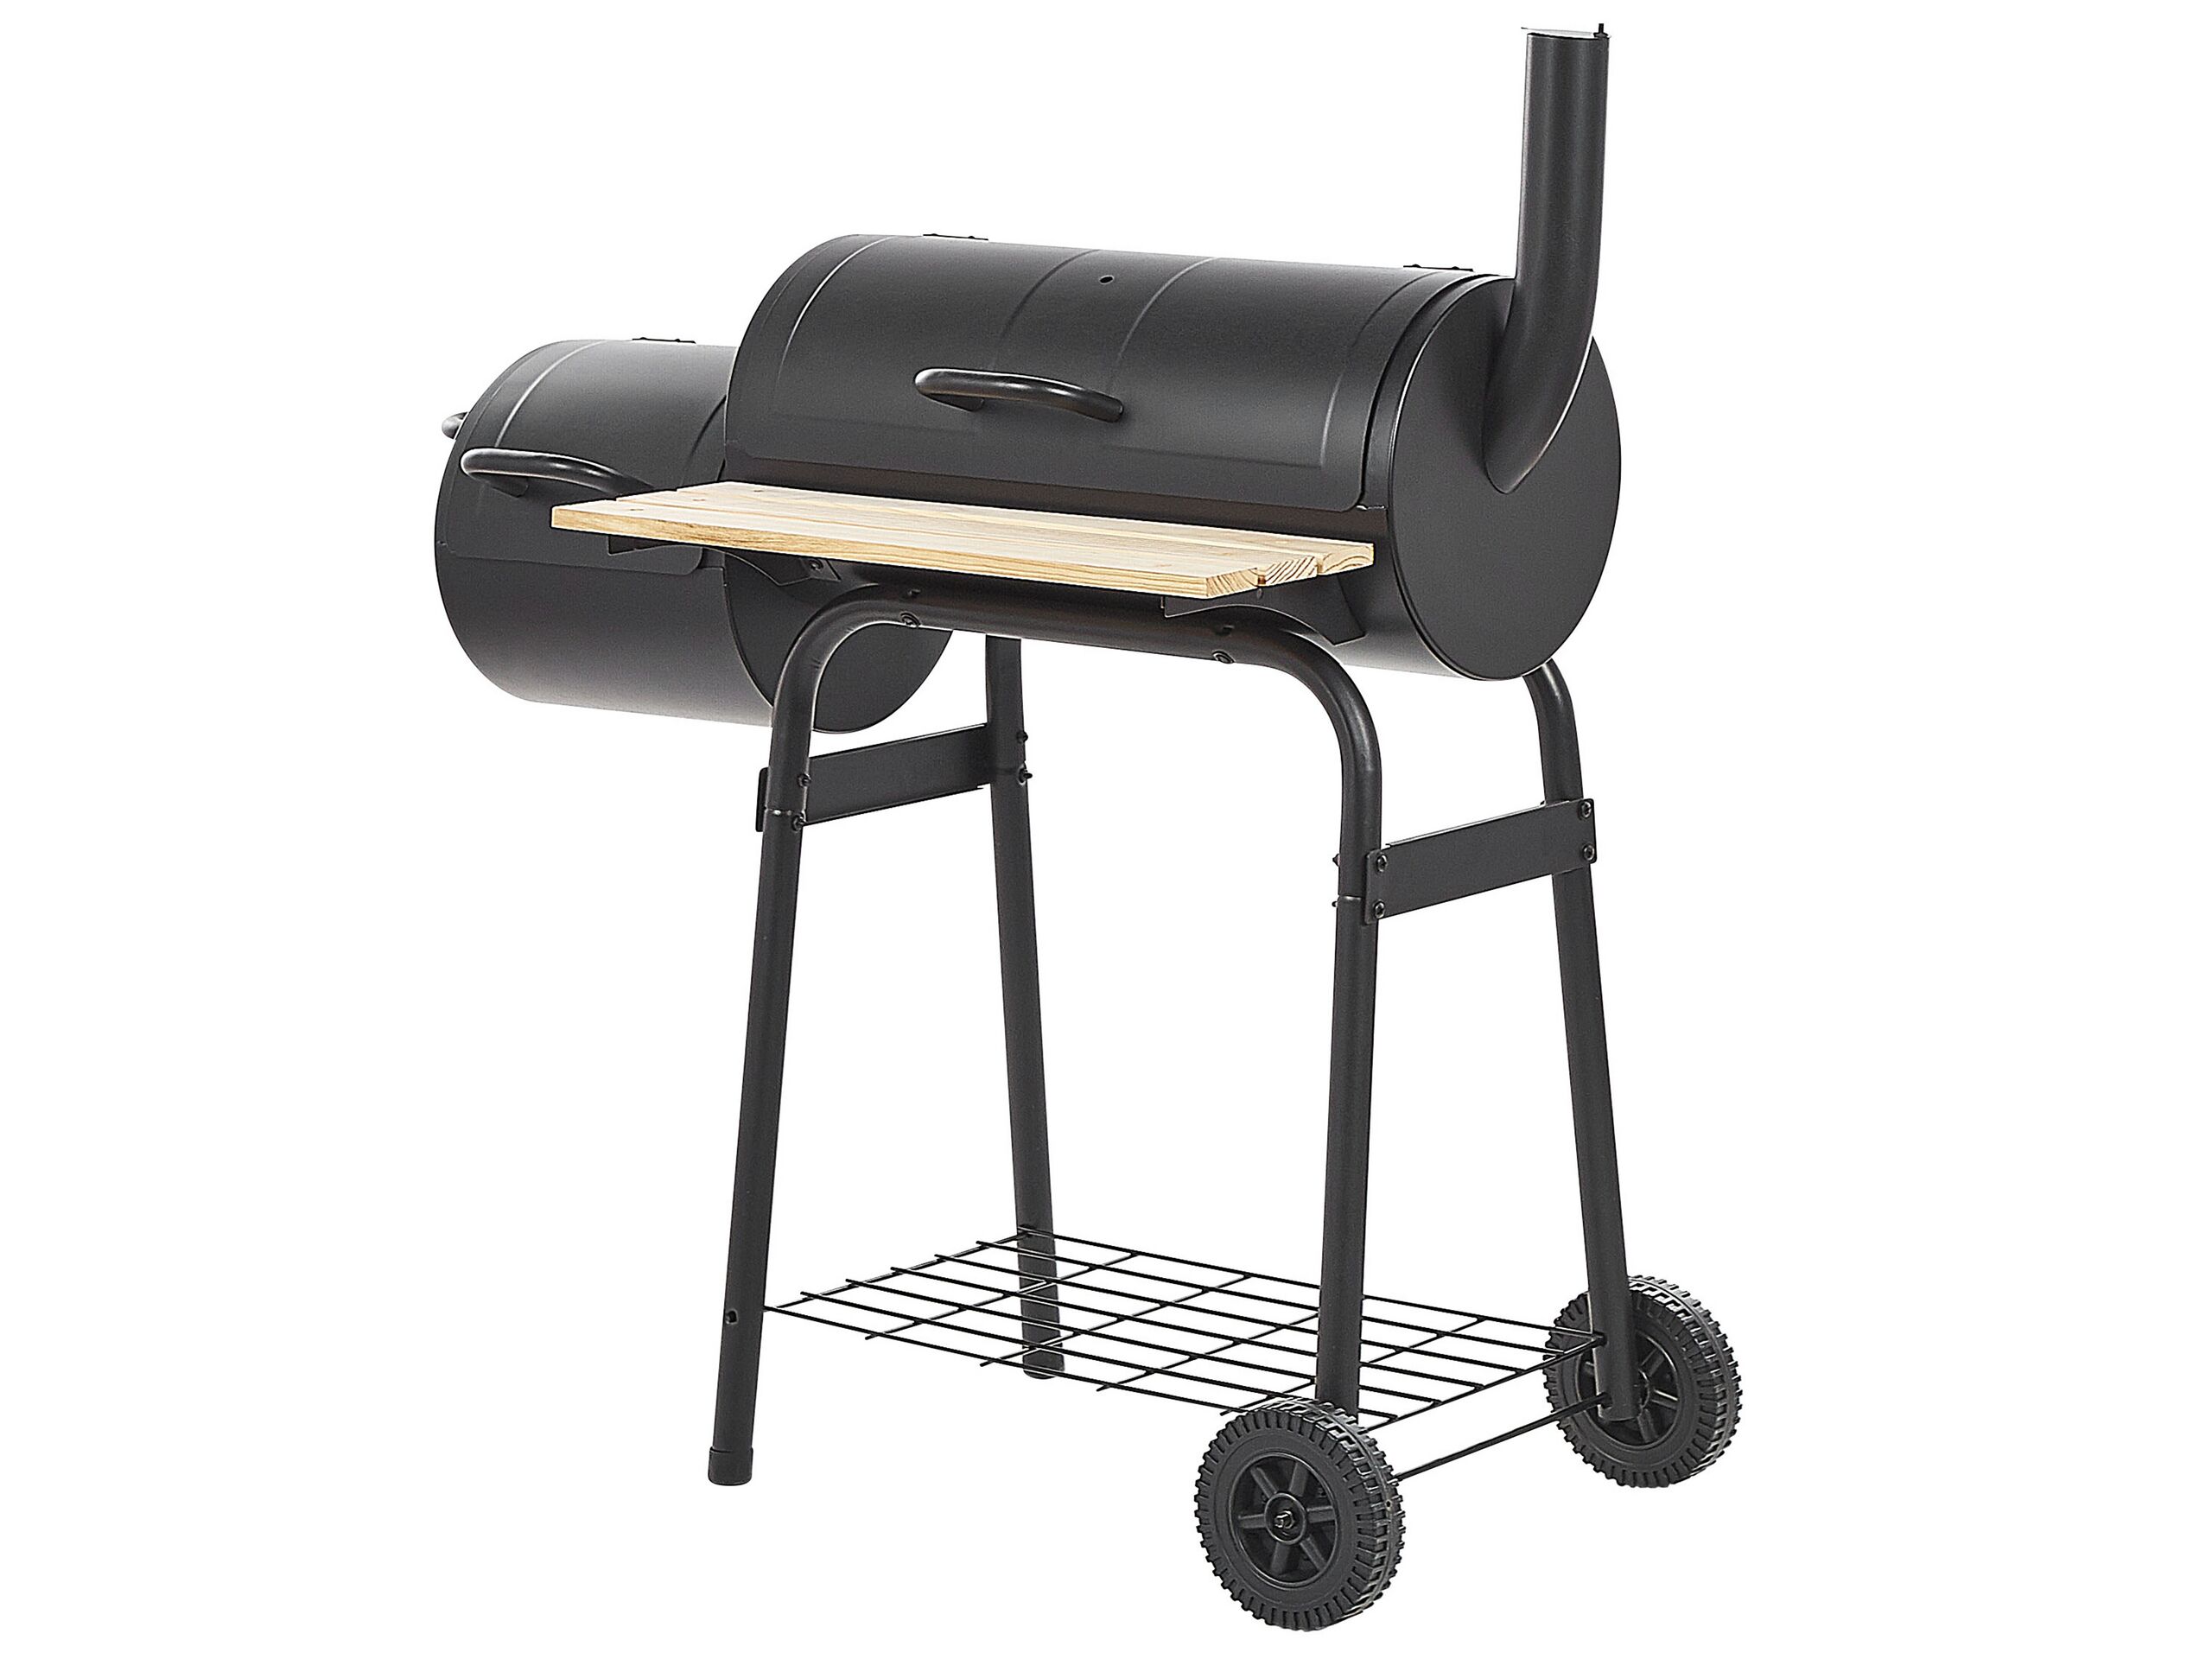 Charcoal Bbq Grill Black Steel With Lid Wheeled Cooking Grate Shelf Offset Smoker Modern Design Beliani